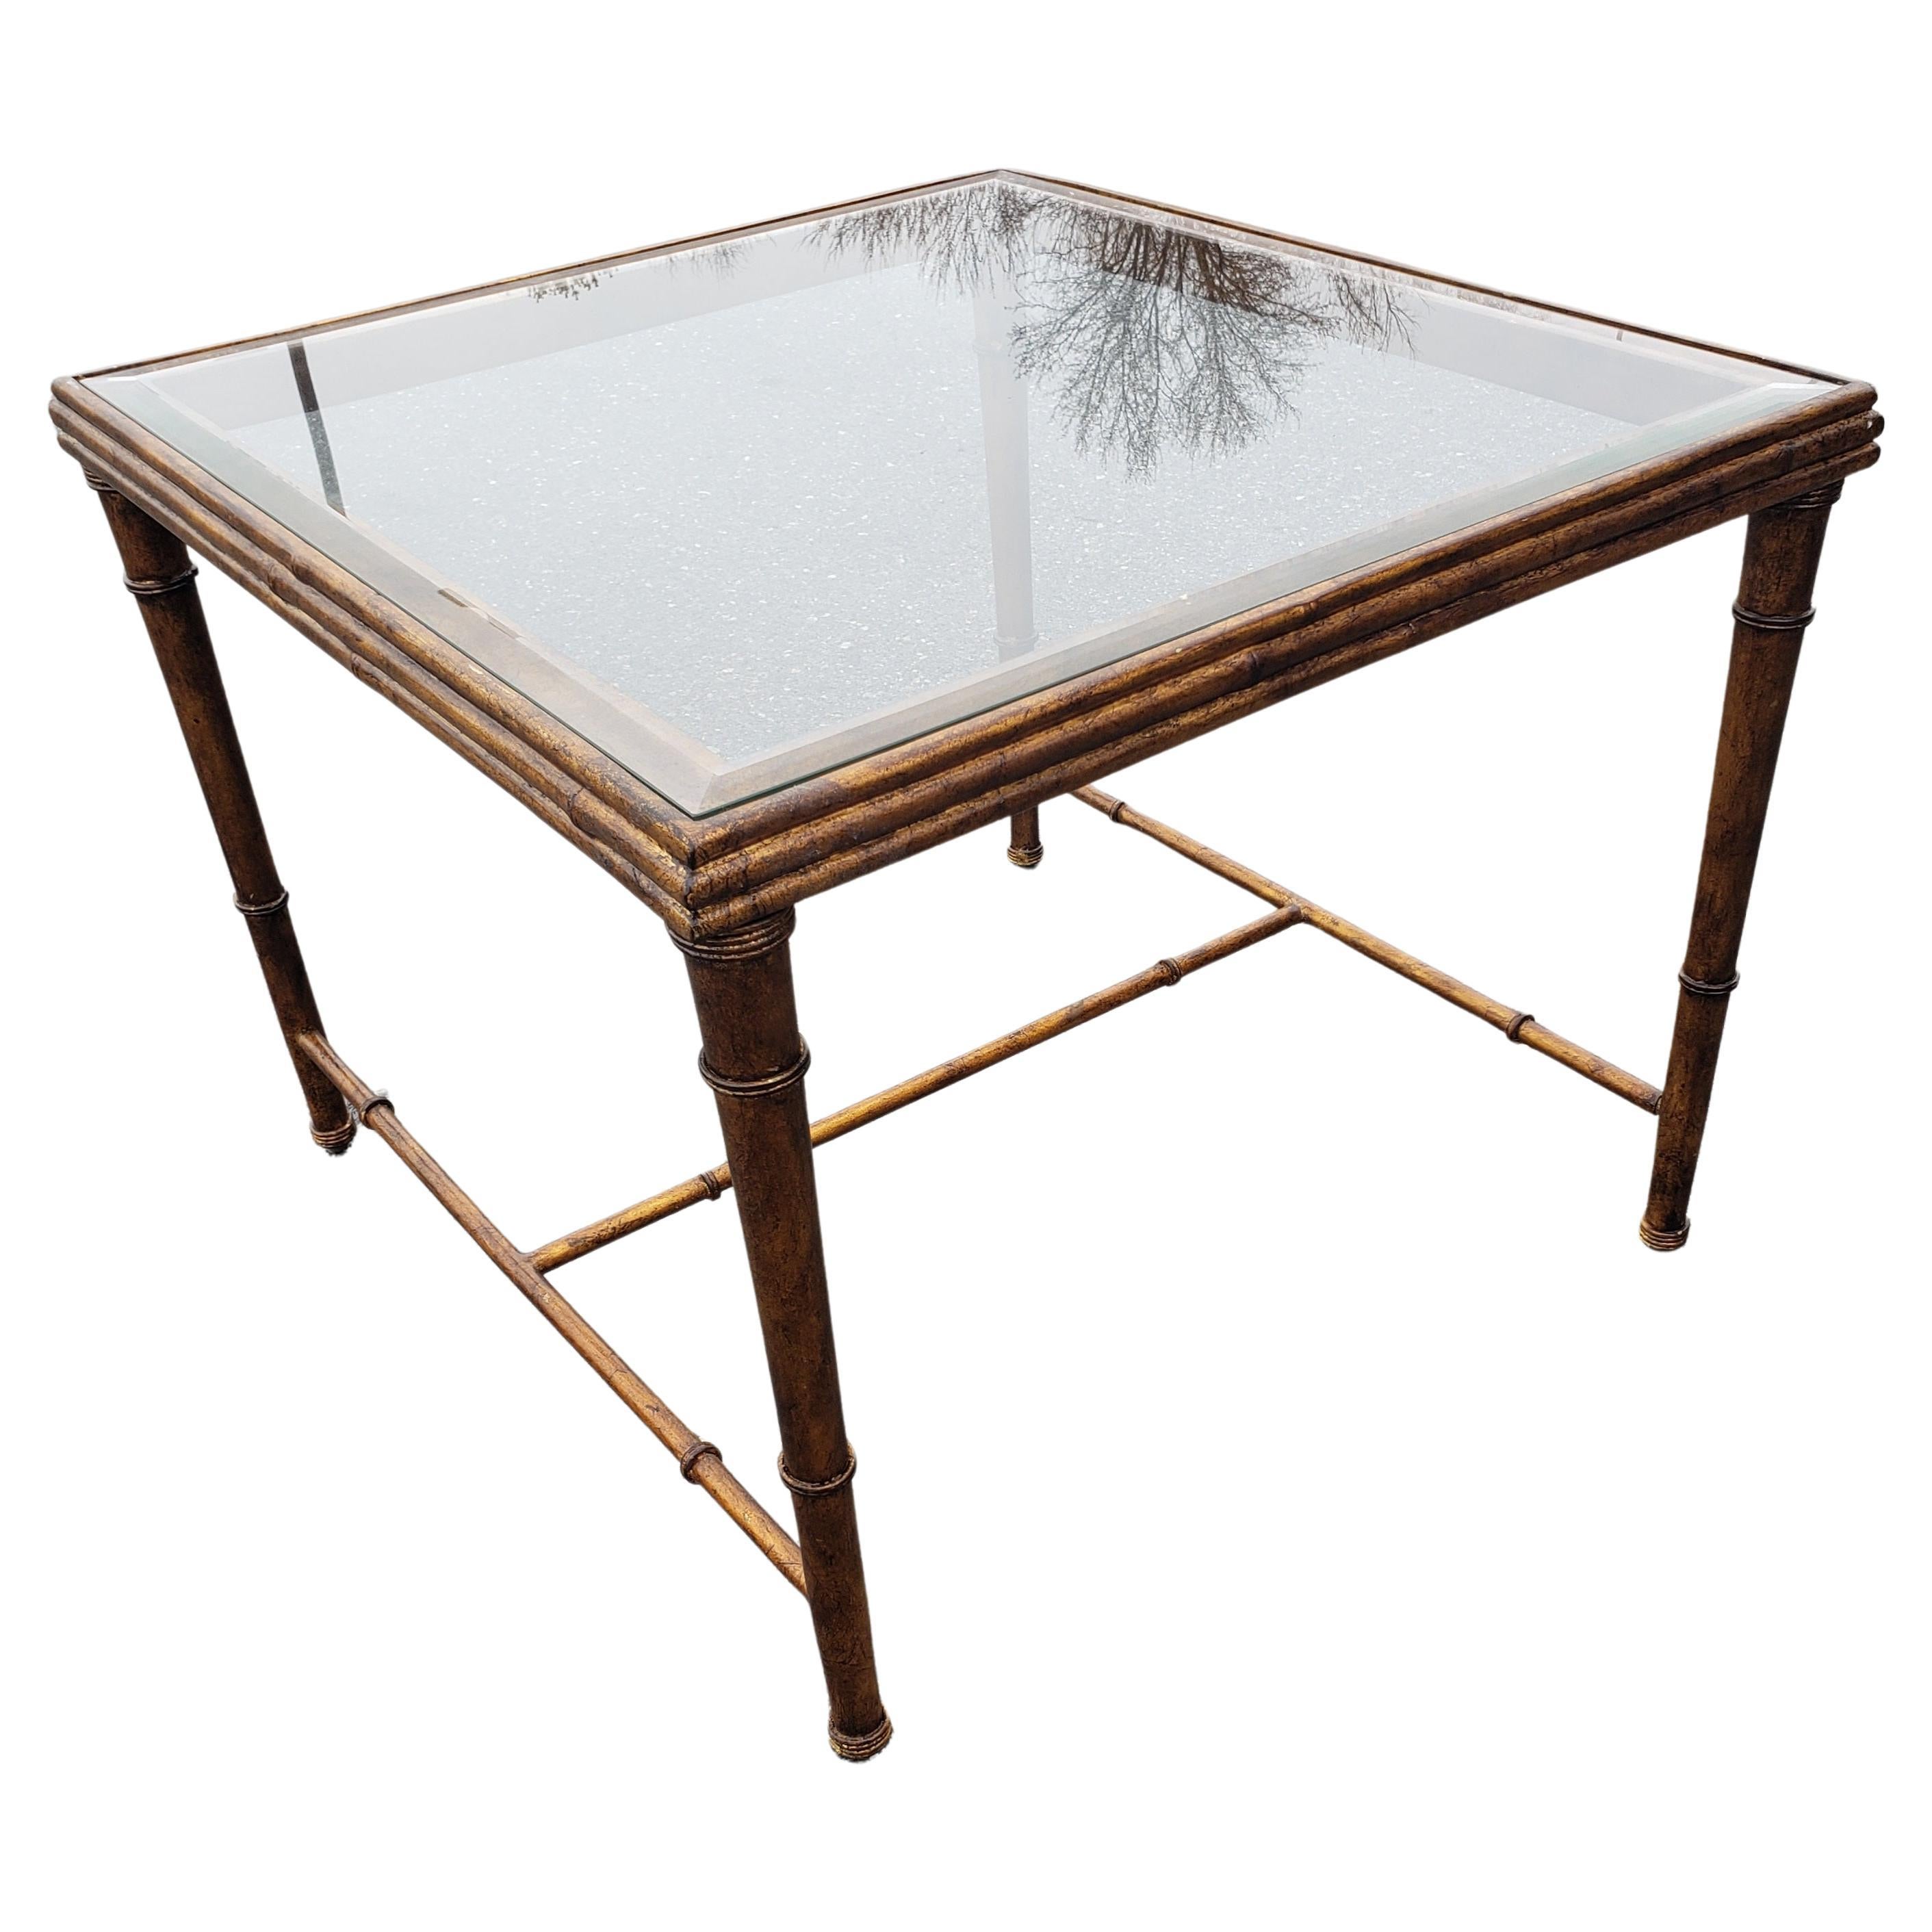 Hollywood Regency Faux Bamboo Giltwood Metal & Glass Center Table or Side Table In Good Condition For Sale In Germantown, MD